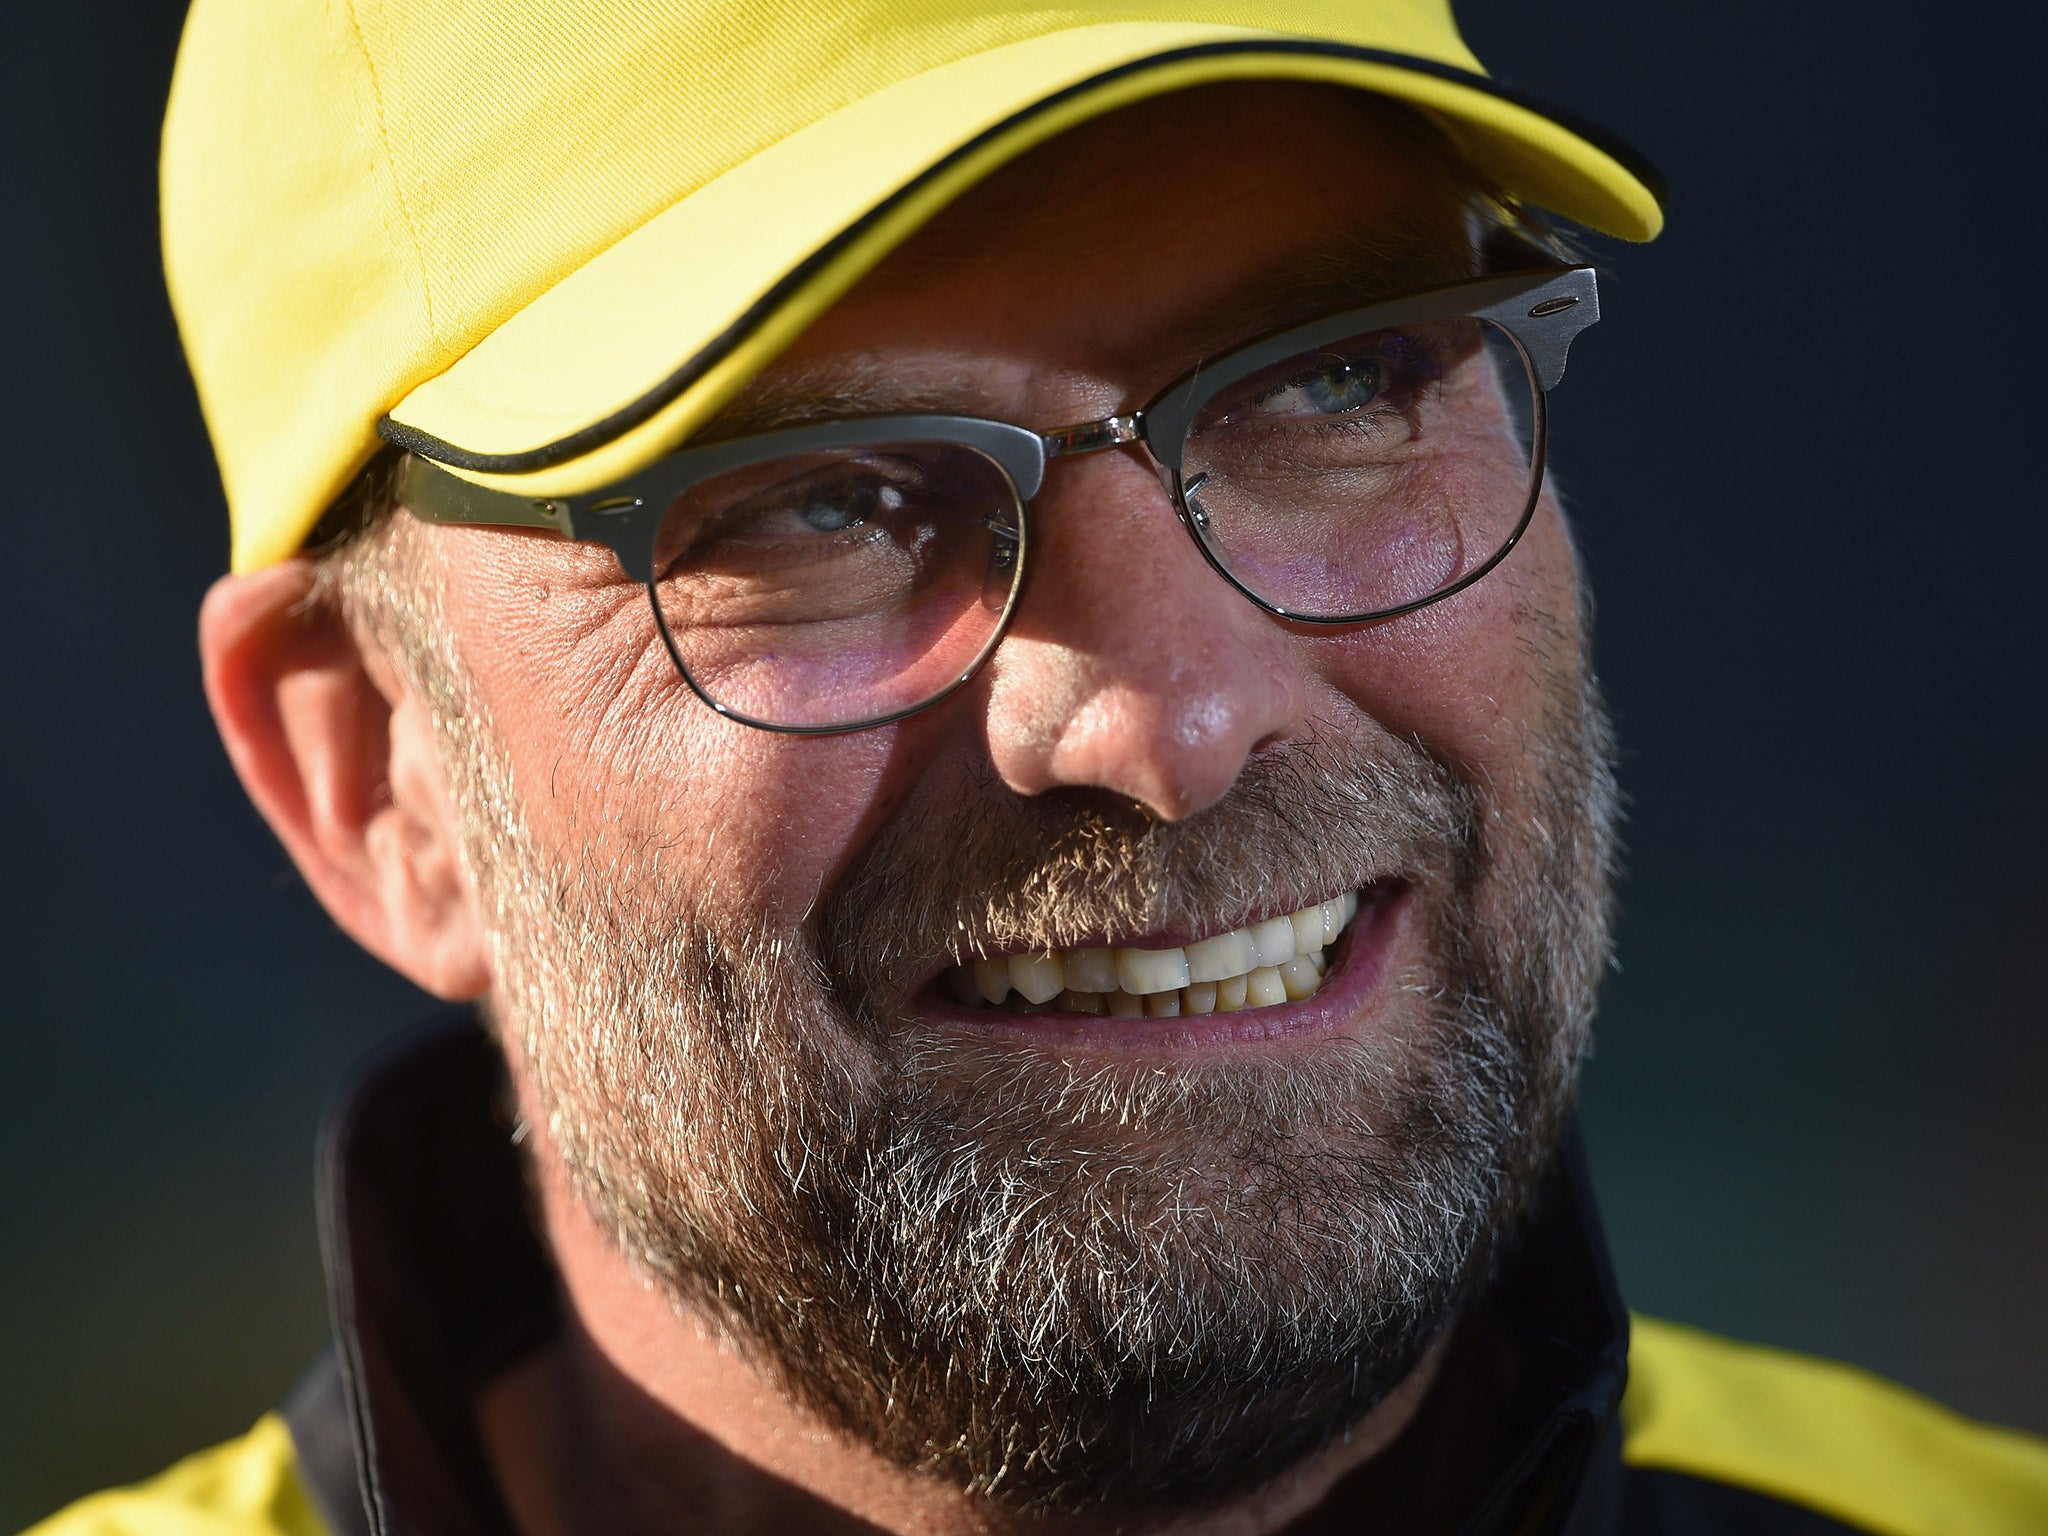 Klopp is expected to finalise the deal in Merseyside on Thursday